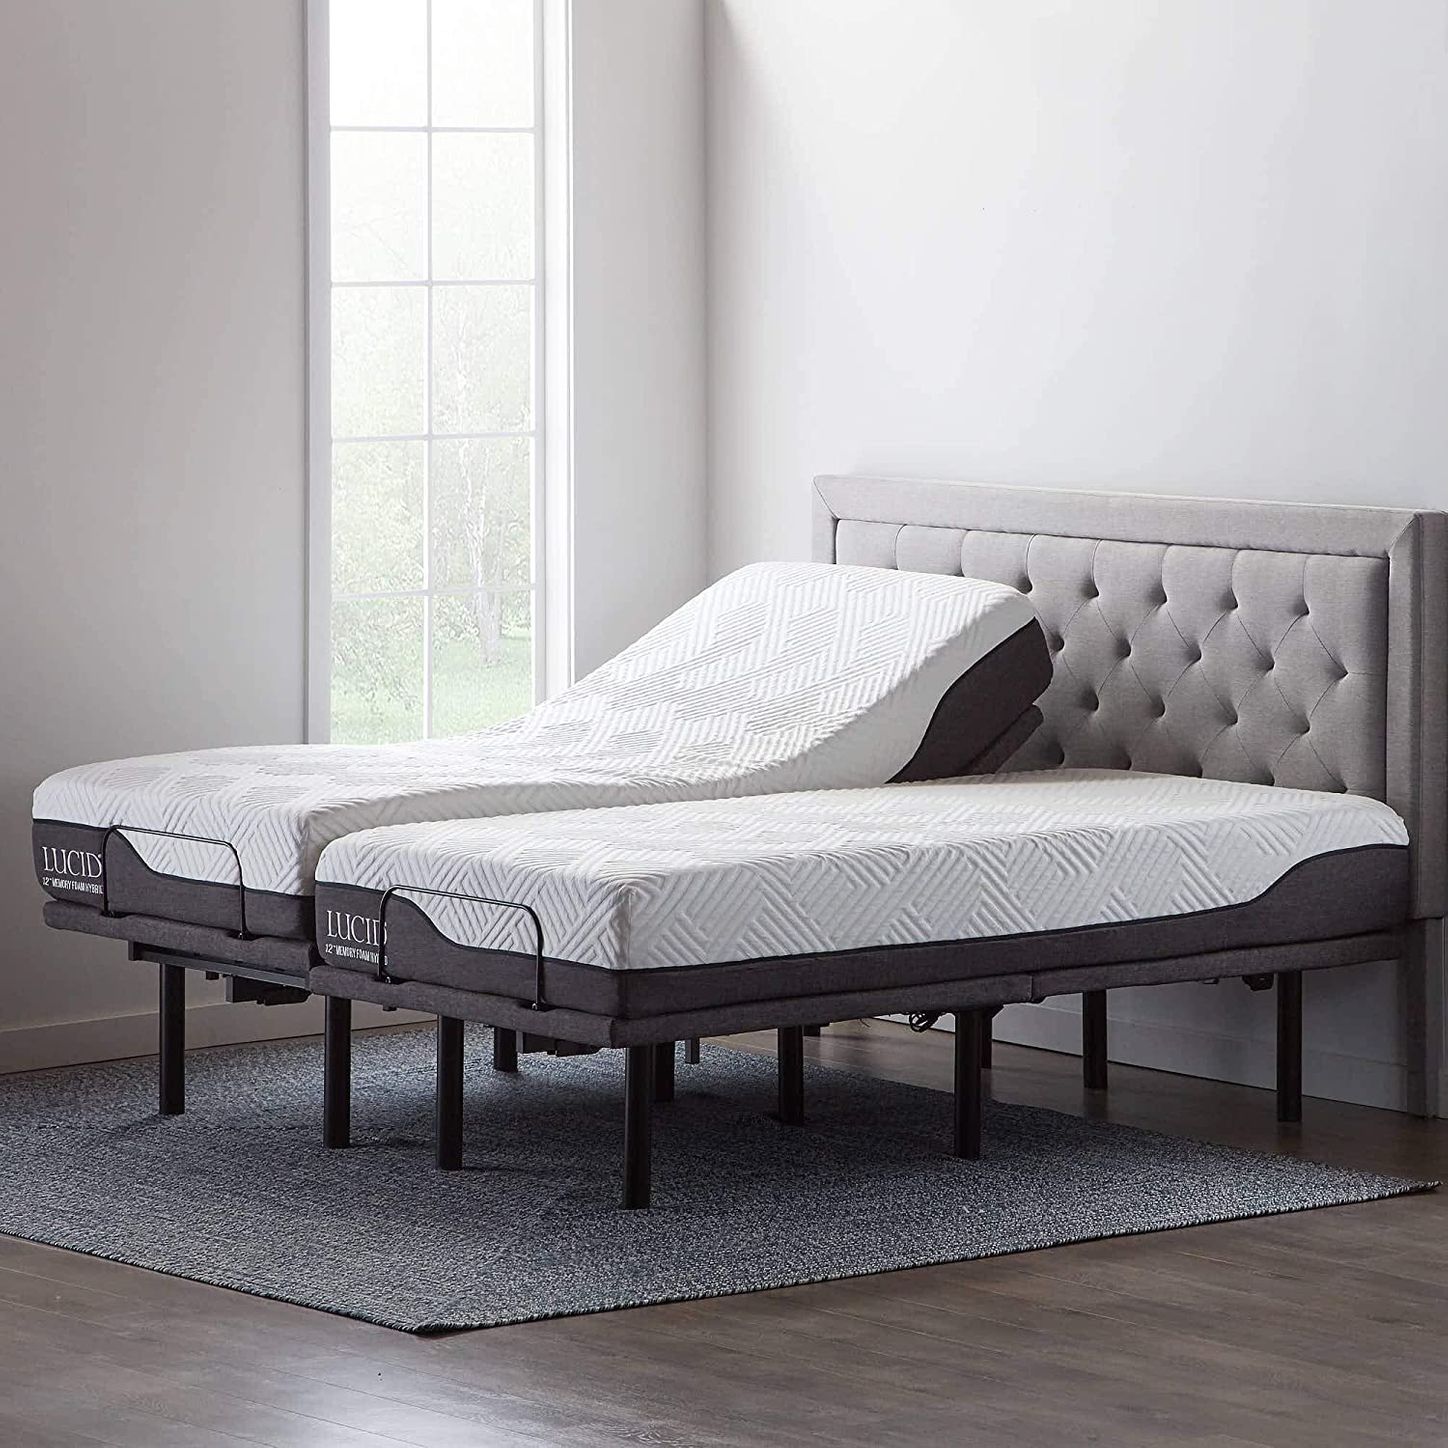 10 Best Adjustable Bed Bases 2021 The, Adjustable King Beds With Mattress